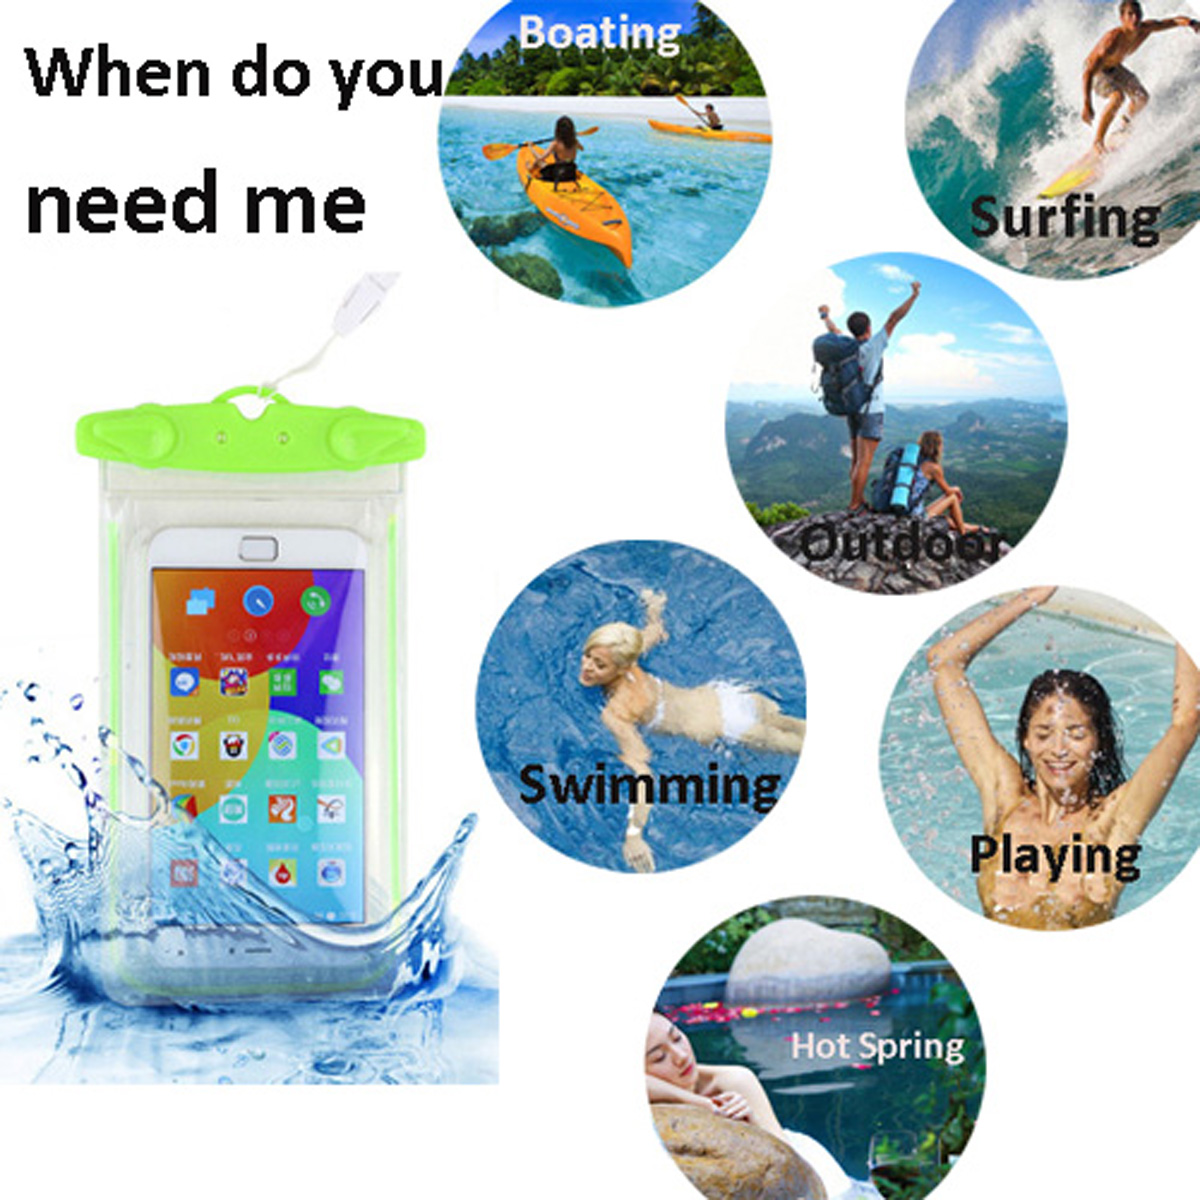 Universal-Waterproof-Fluorescent-Under-Water-Pouch-Case-Cover-For-Mobile-Phones-1003177-4